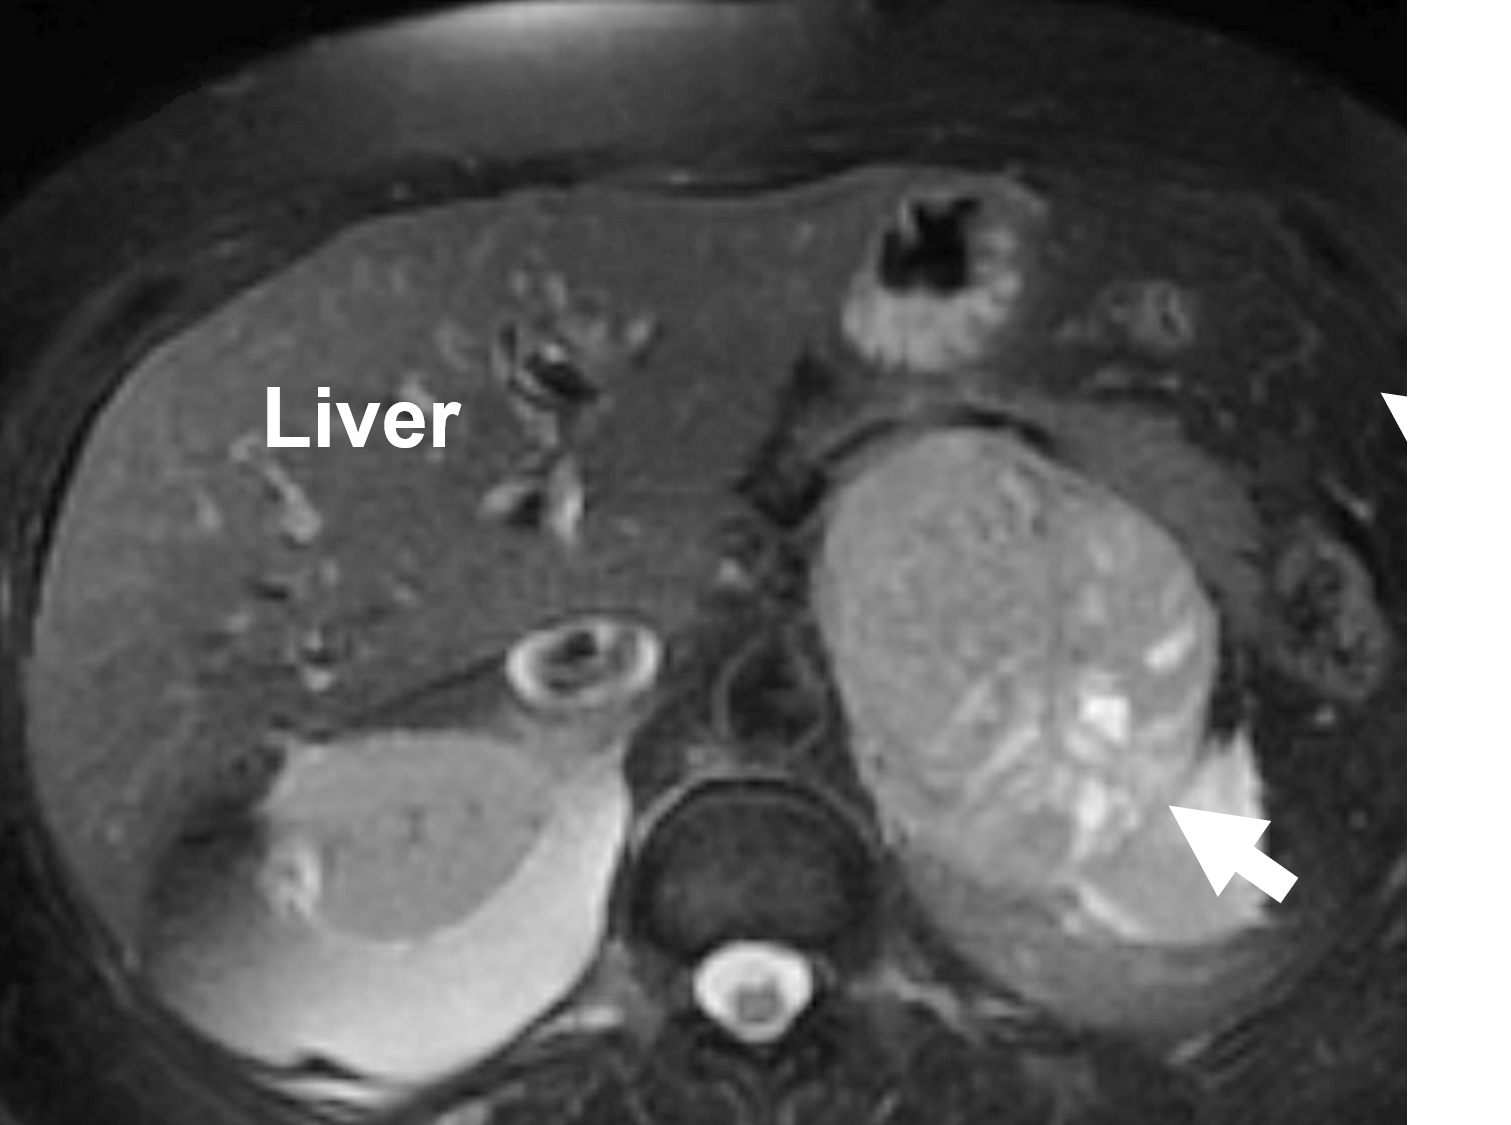 The large adrenal gland cancer (13.5 cm; arrow) is shown sitting on top of the left kidney